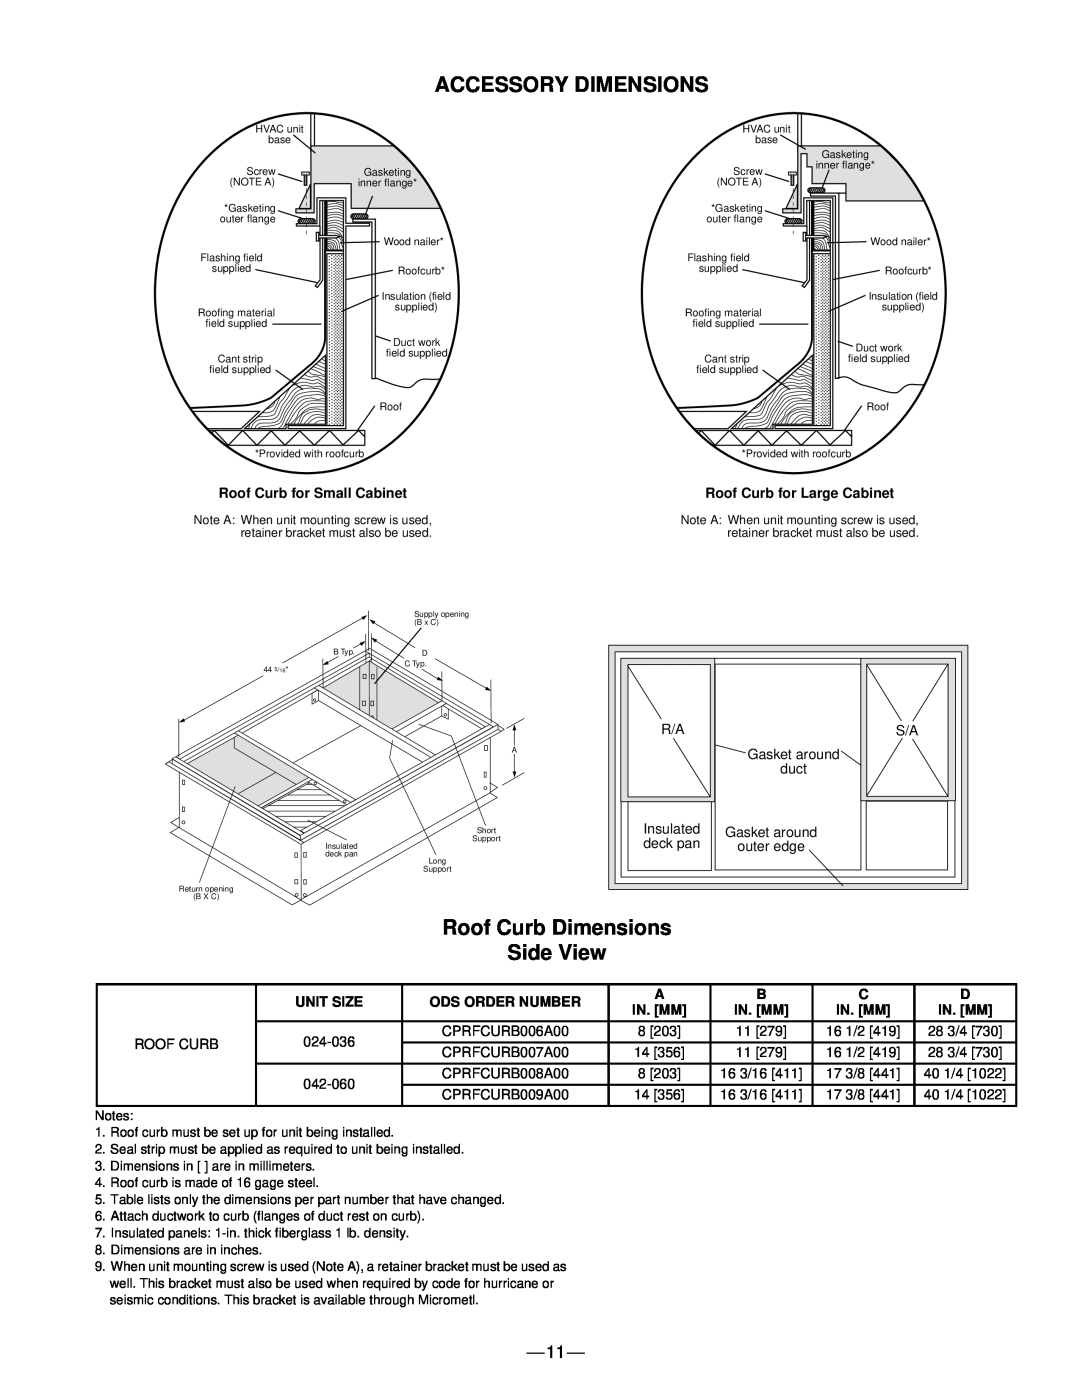 Bryant 583B manual Accessory Dimensions, Roof Curb Dimensions Side View 